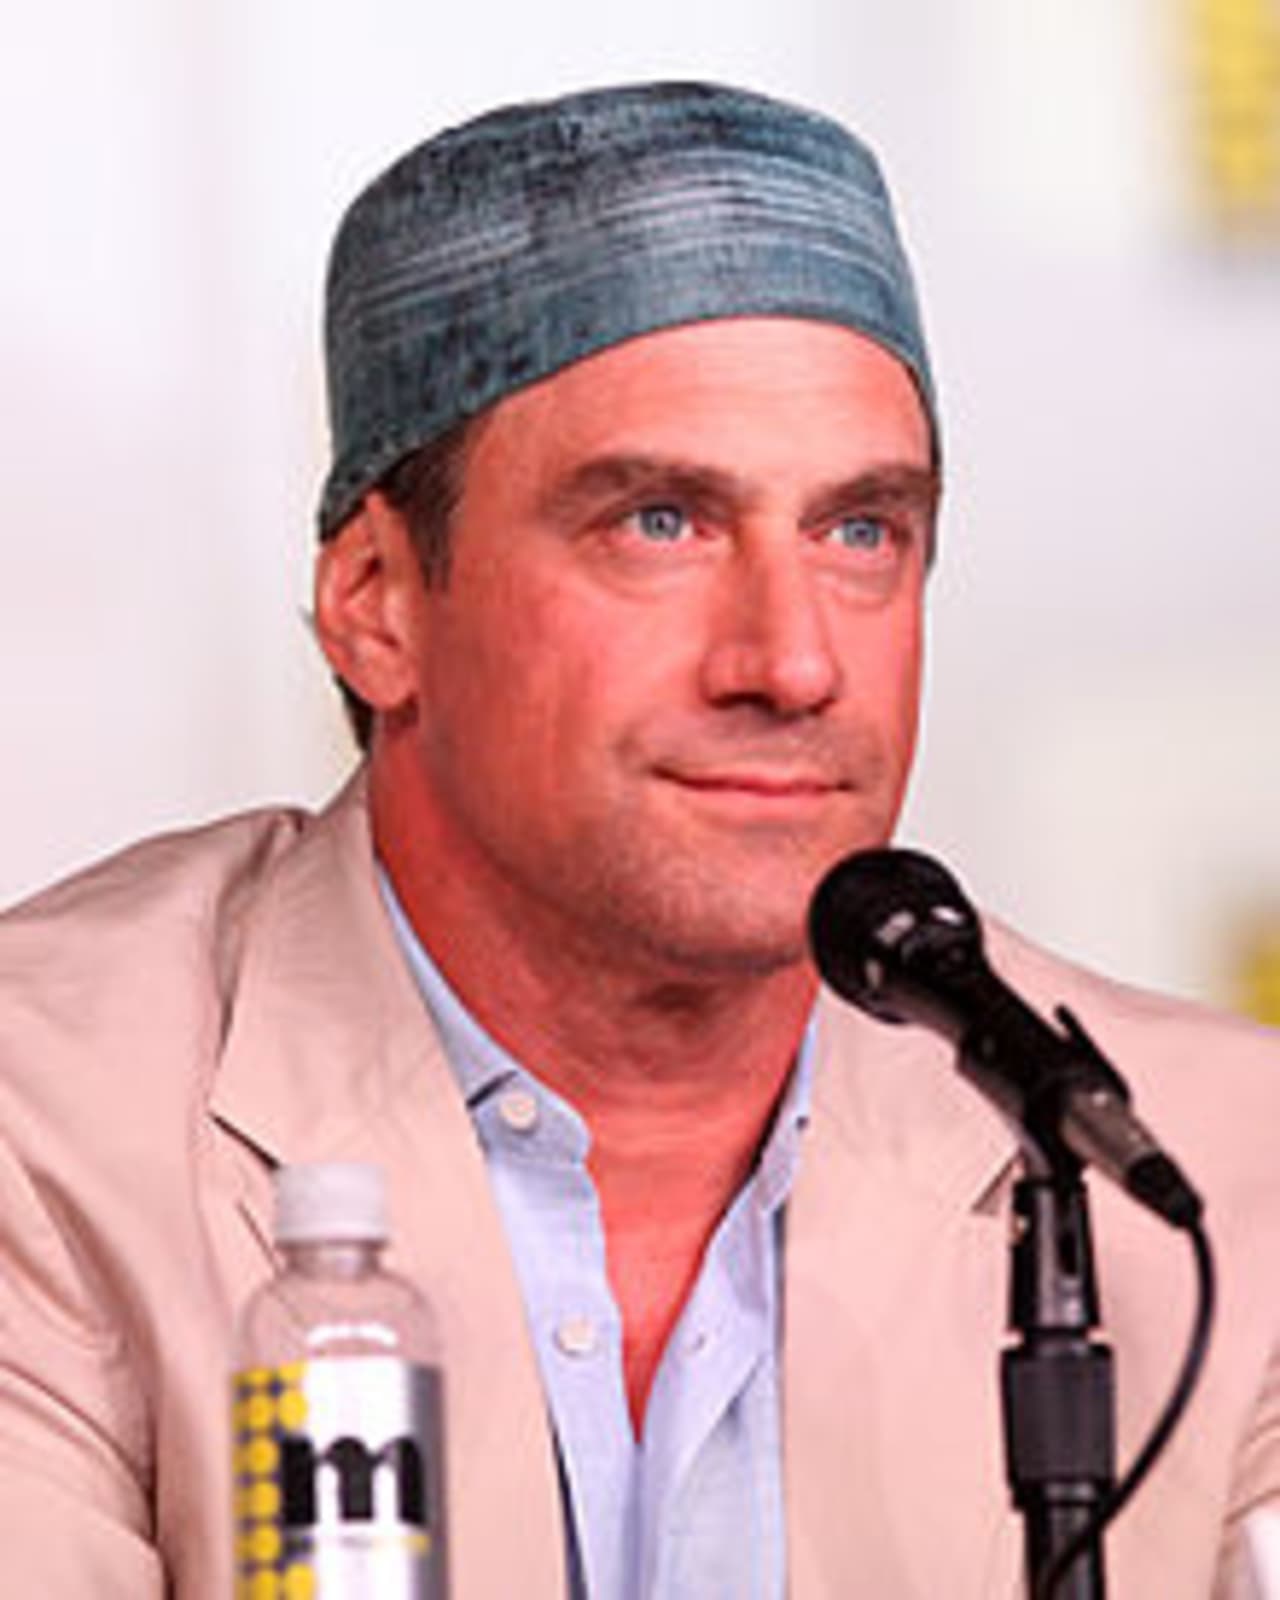 Christopher Meloni turns 53 on Wednesday.